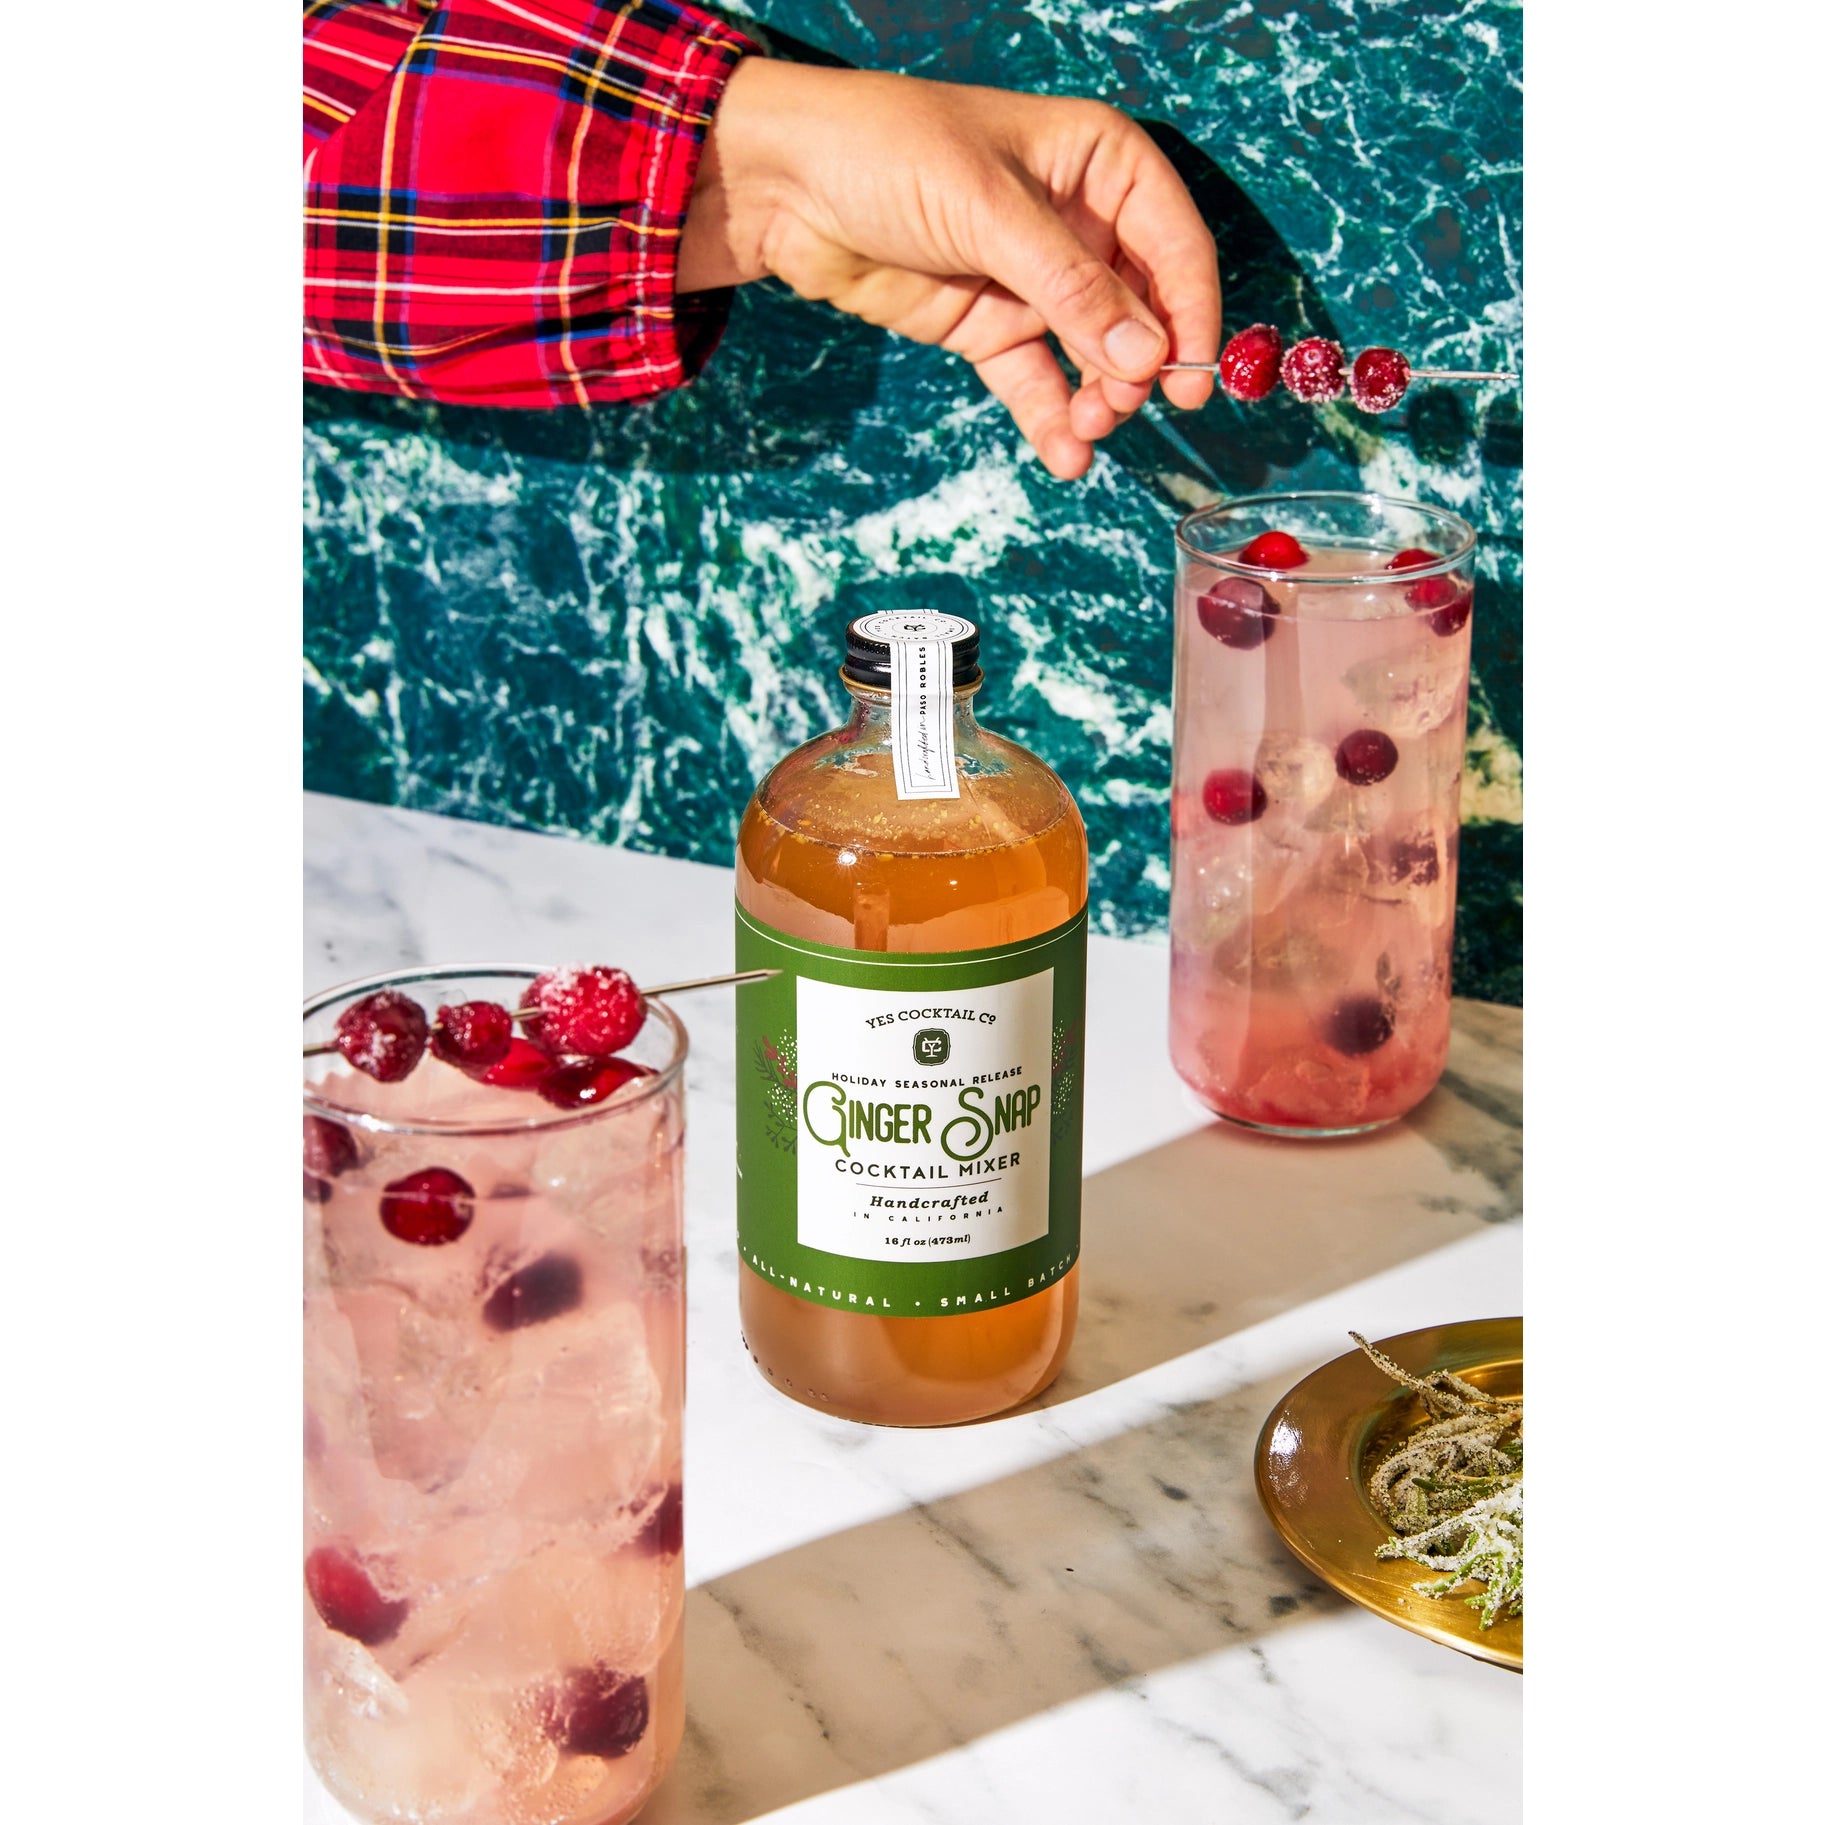 Holiday Seasonal : Cranberry Spice Cocktail Mixer - Yes Cocktail Company